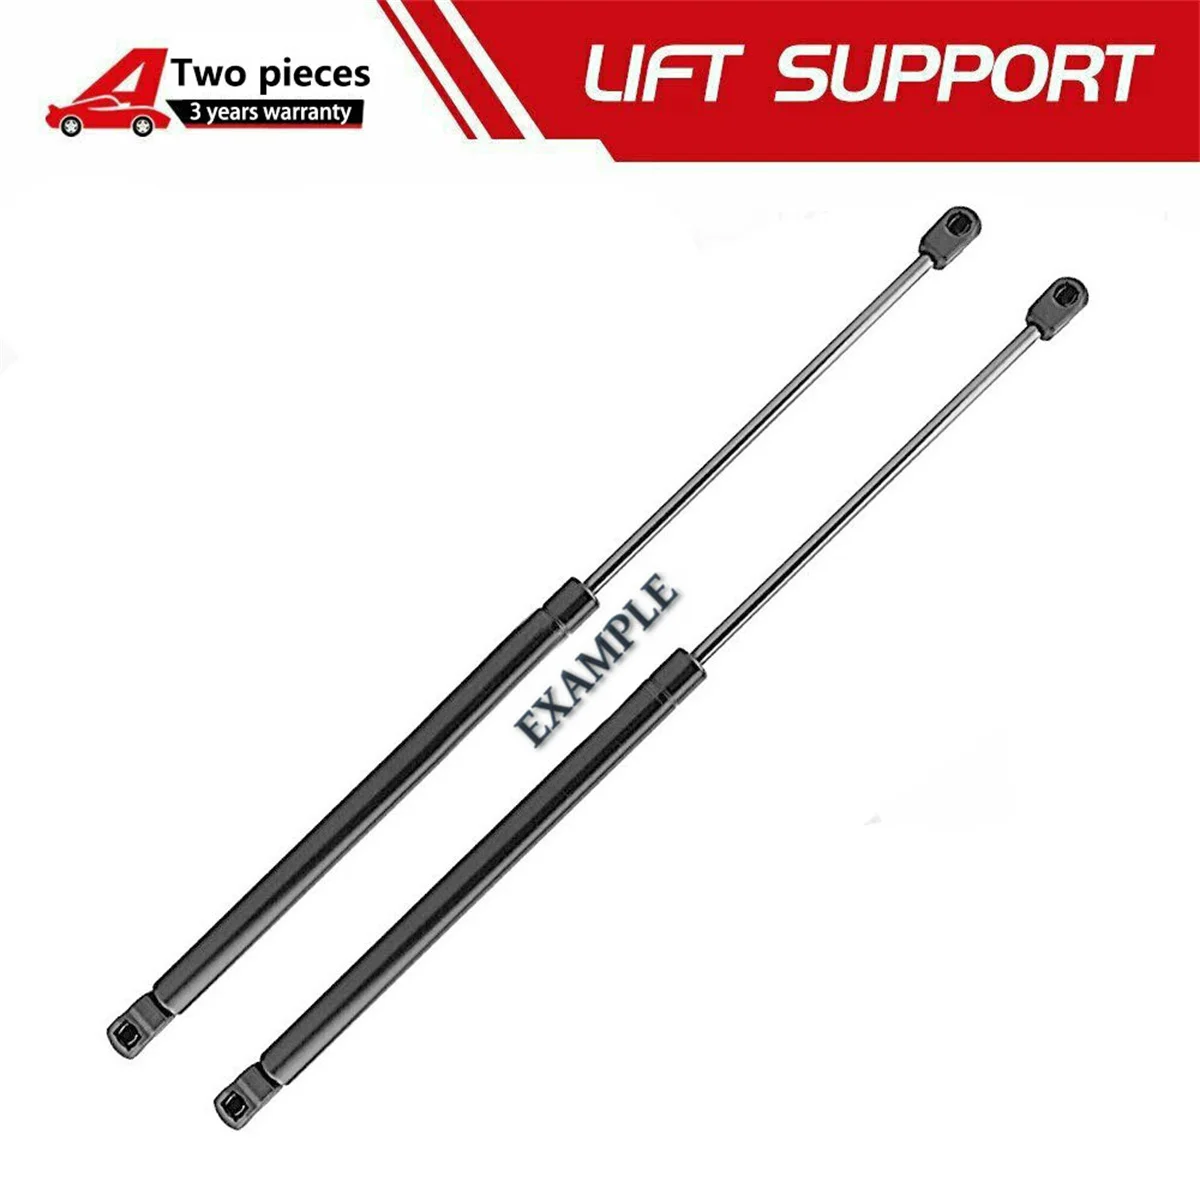 

2 Hood Lift Supports Struts Shocks Prop For Chevy Malibu 08-12 Saturn Aura 08-09 Extended Length:19.62"